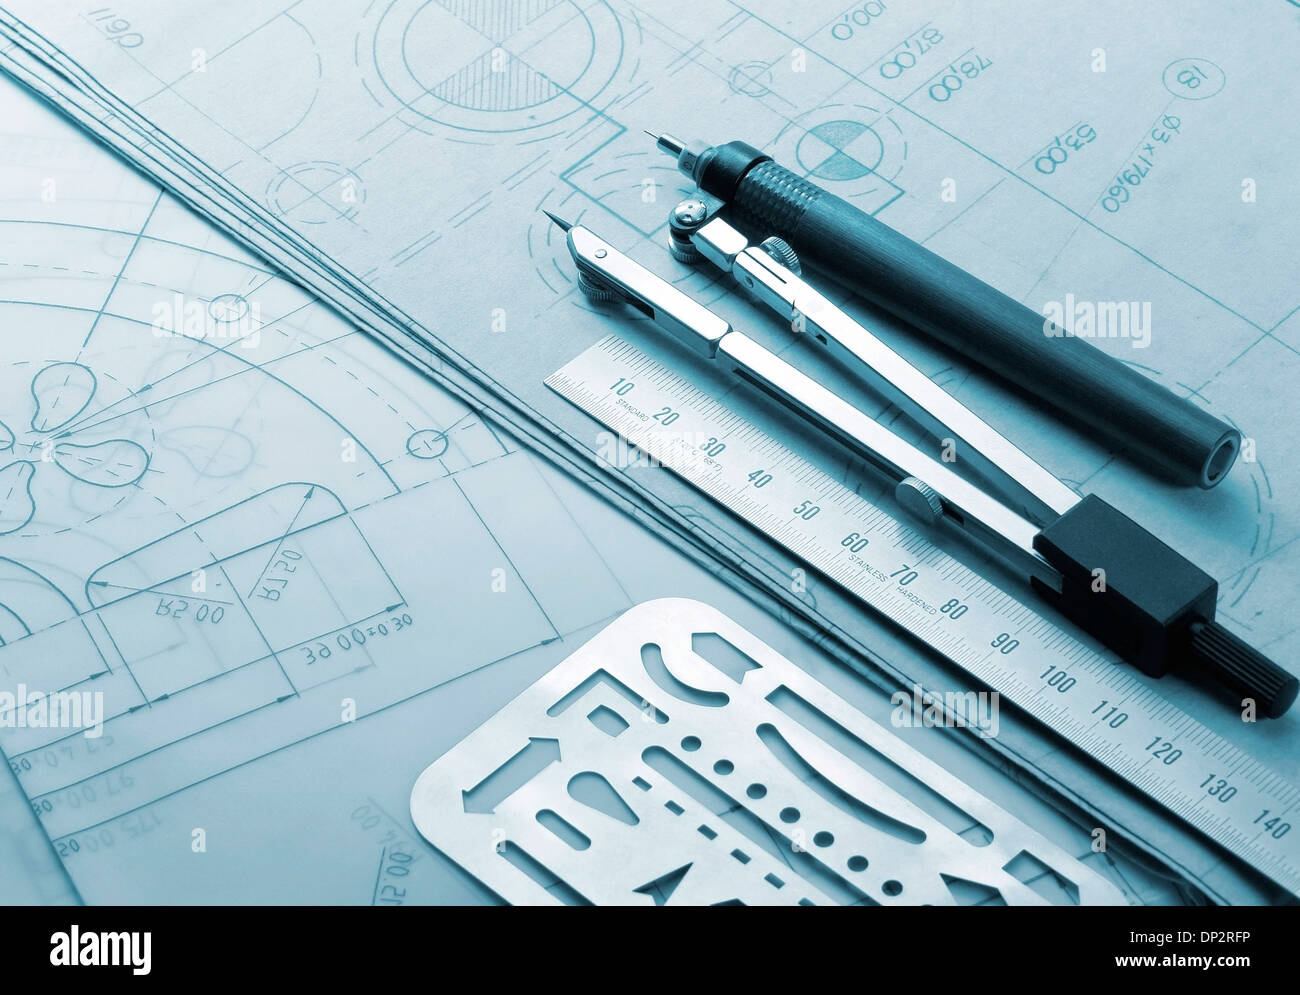 Technical drawing instruments Stock Photo